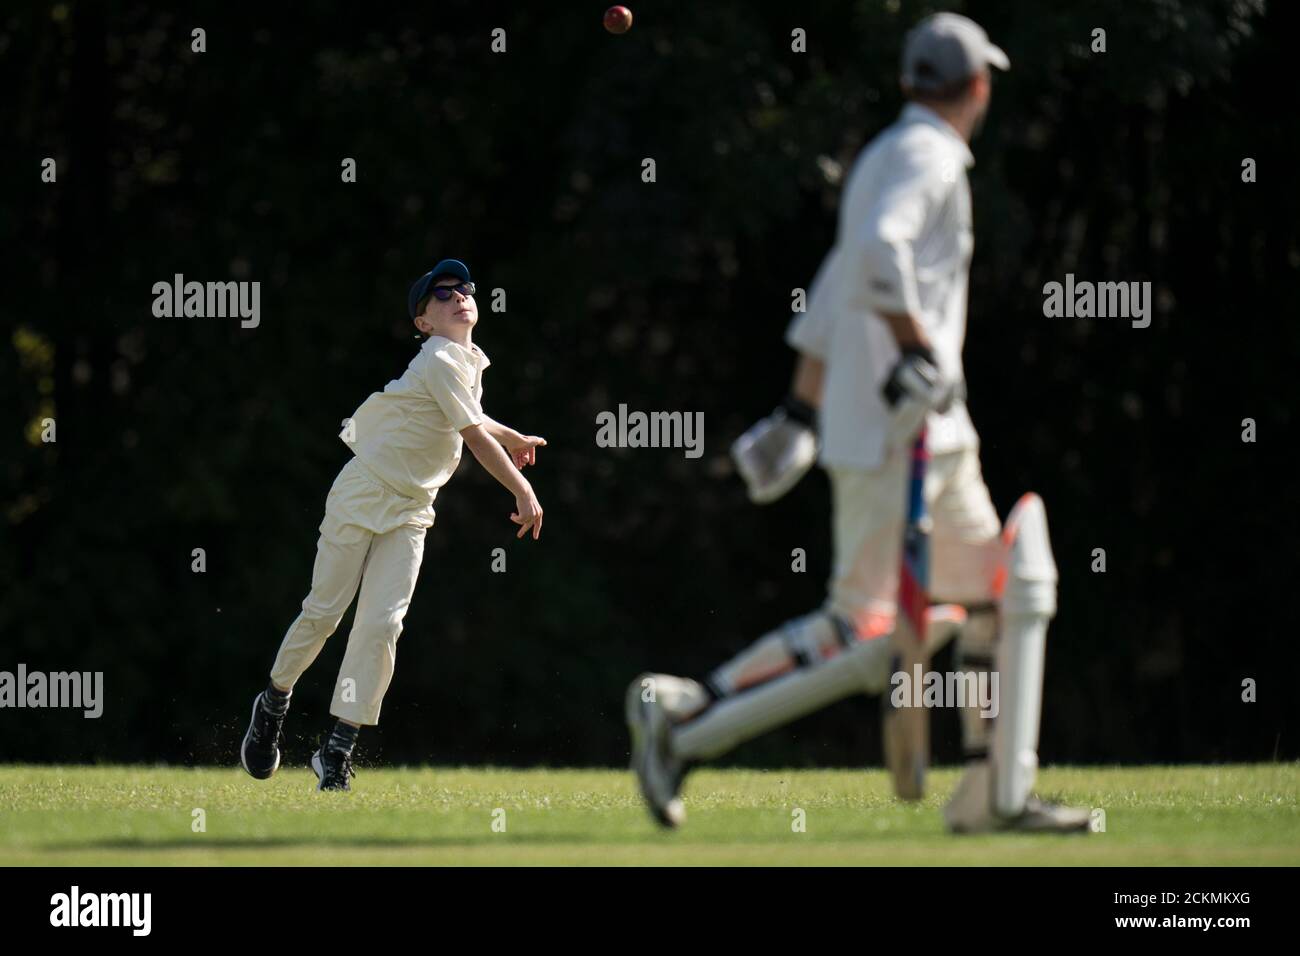 Young boy throwing cricket ball during village cricket match for all ages. Stock Photo